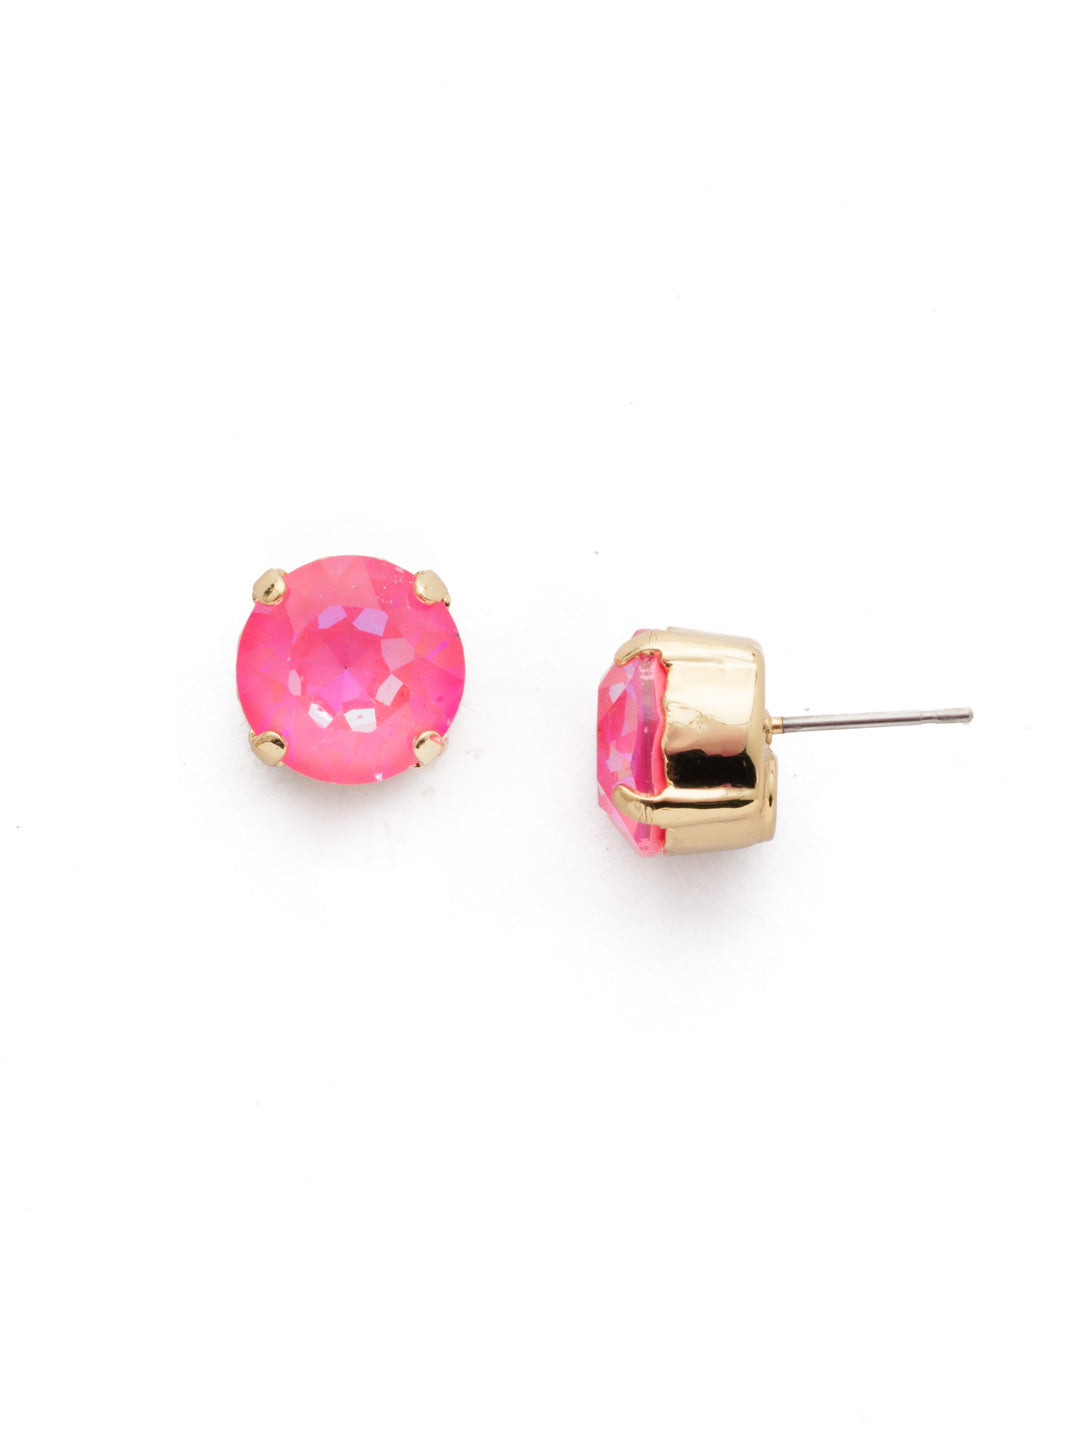 London Stud Earrings - ECM14BGISS - <p>Everyone needs a great pair of studs. Add some classic sparkle to any occasion with these stud earrings. Need help picking a stud? <a href="https://www.sorrelli.com/blogs/sisterhood/round-stud-earrings-101-a-rundown-of-sizes-styles-and-sparkle">Check out our size guide!</a> From Sorrelli's Island Sun collection in our Bright Gold-tone finish.</p>